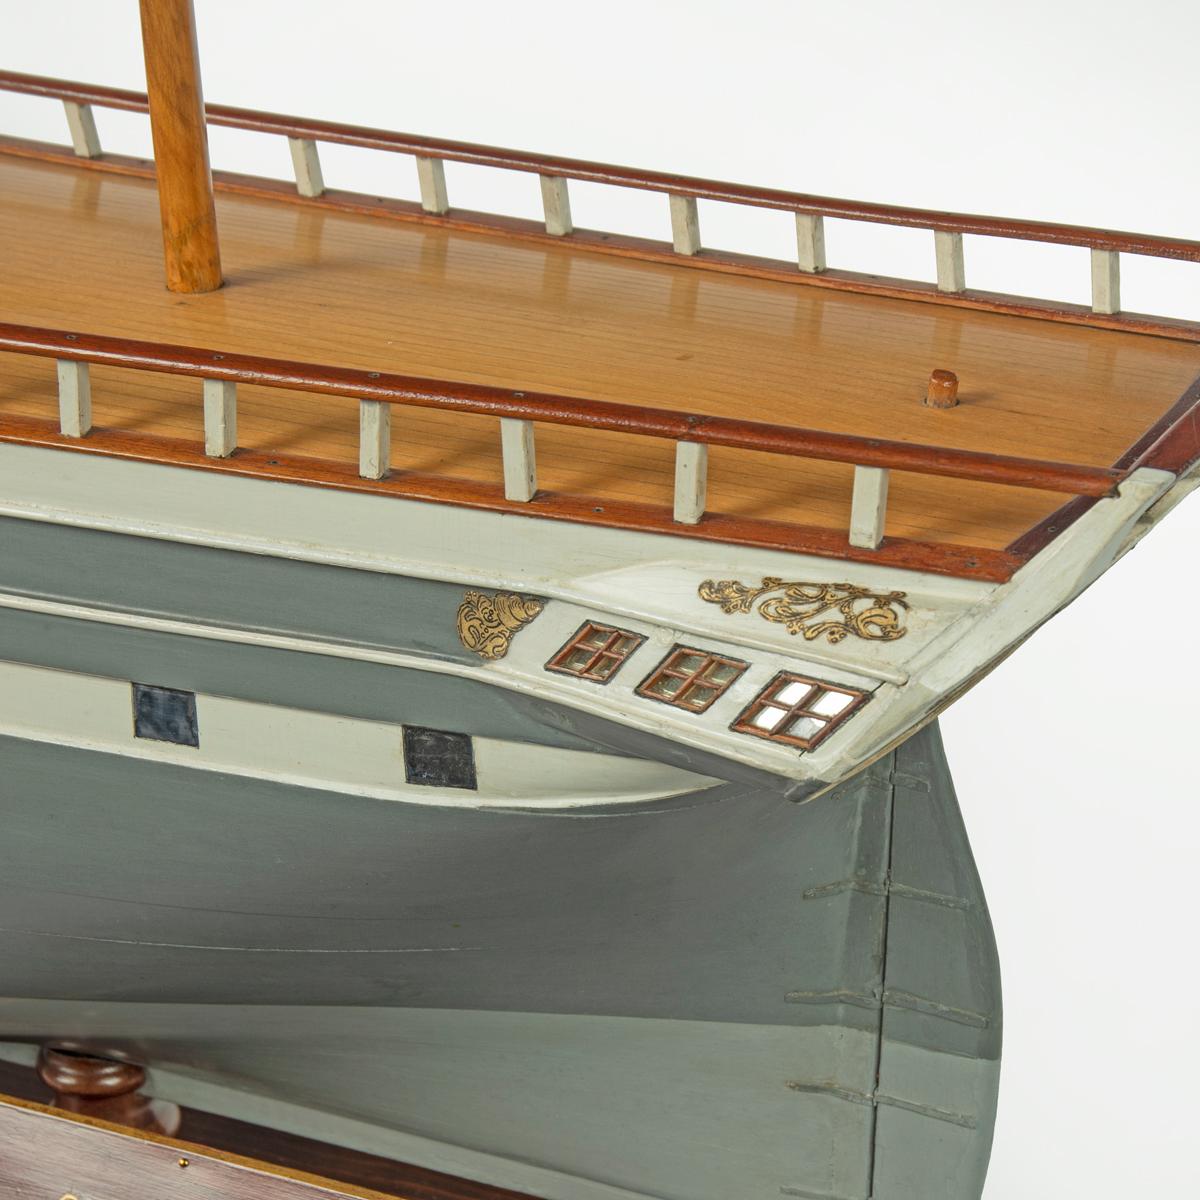 This wooden model is painted in both light and dark grey with a white gunport band and faux gunports, a golden lion figurehead and the name Vimiera in applied gold lettering on the bow.  There are three masts, sparse deck fittings and mahogany